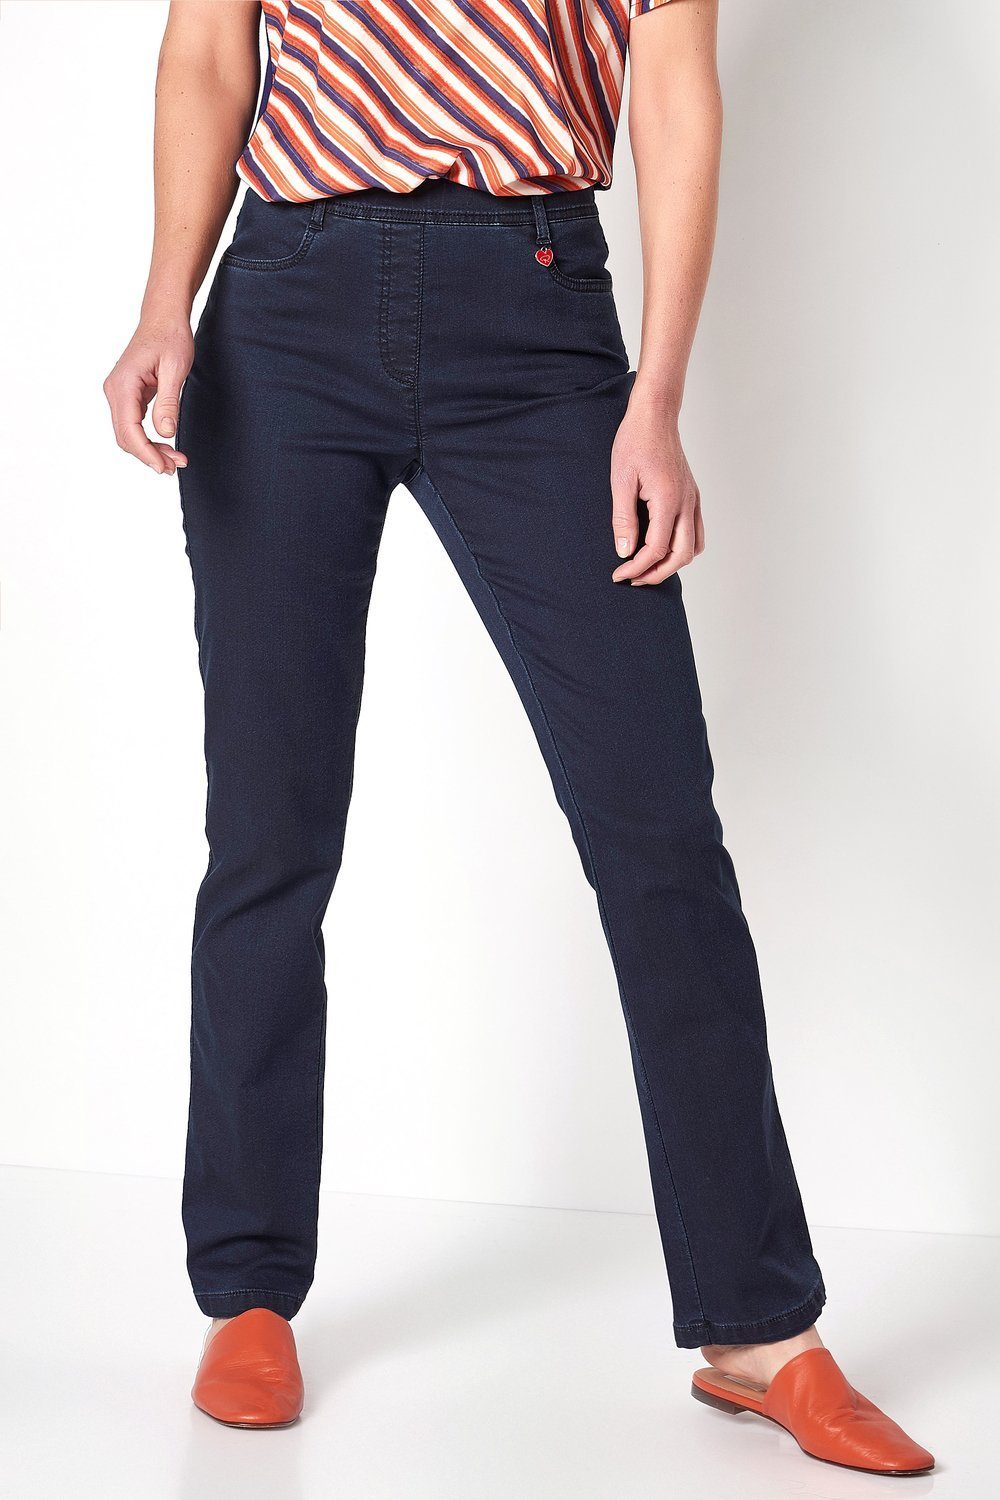 Relaxed by TONI Schlupfhose Relaxed Alice by Jeans Toni dunkelblau Damen (1-tlg)